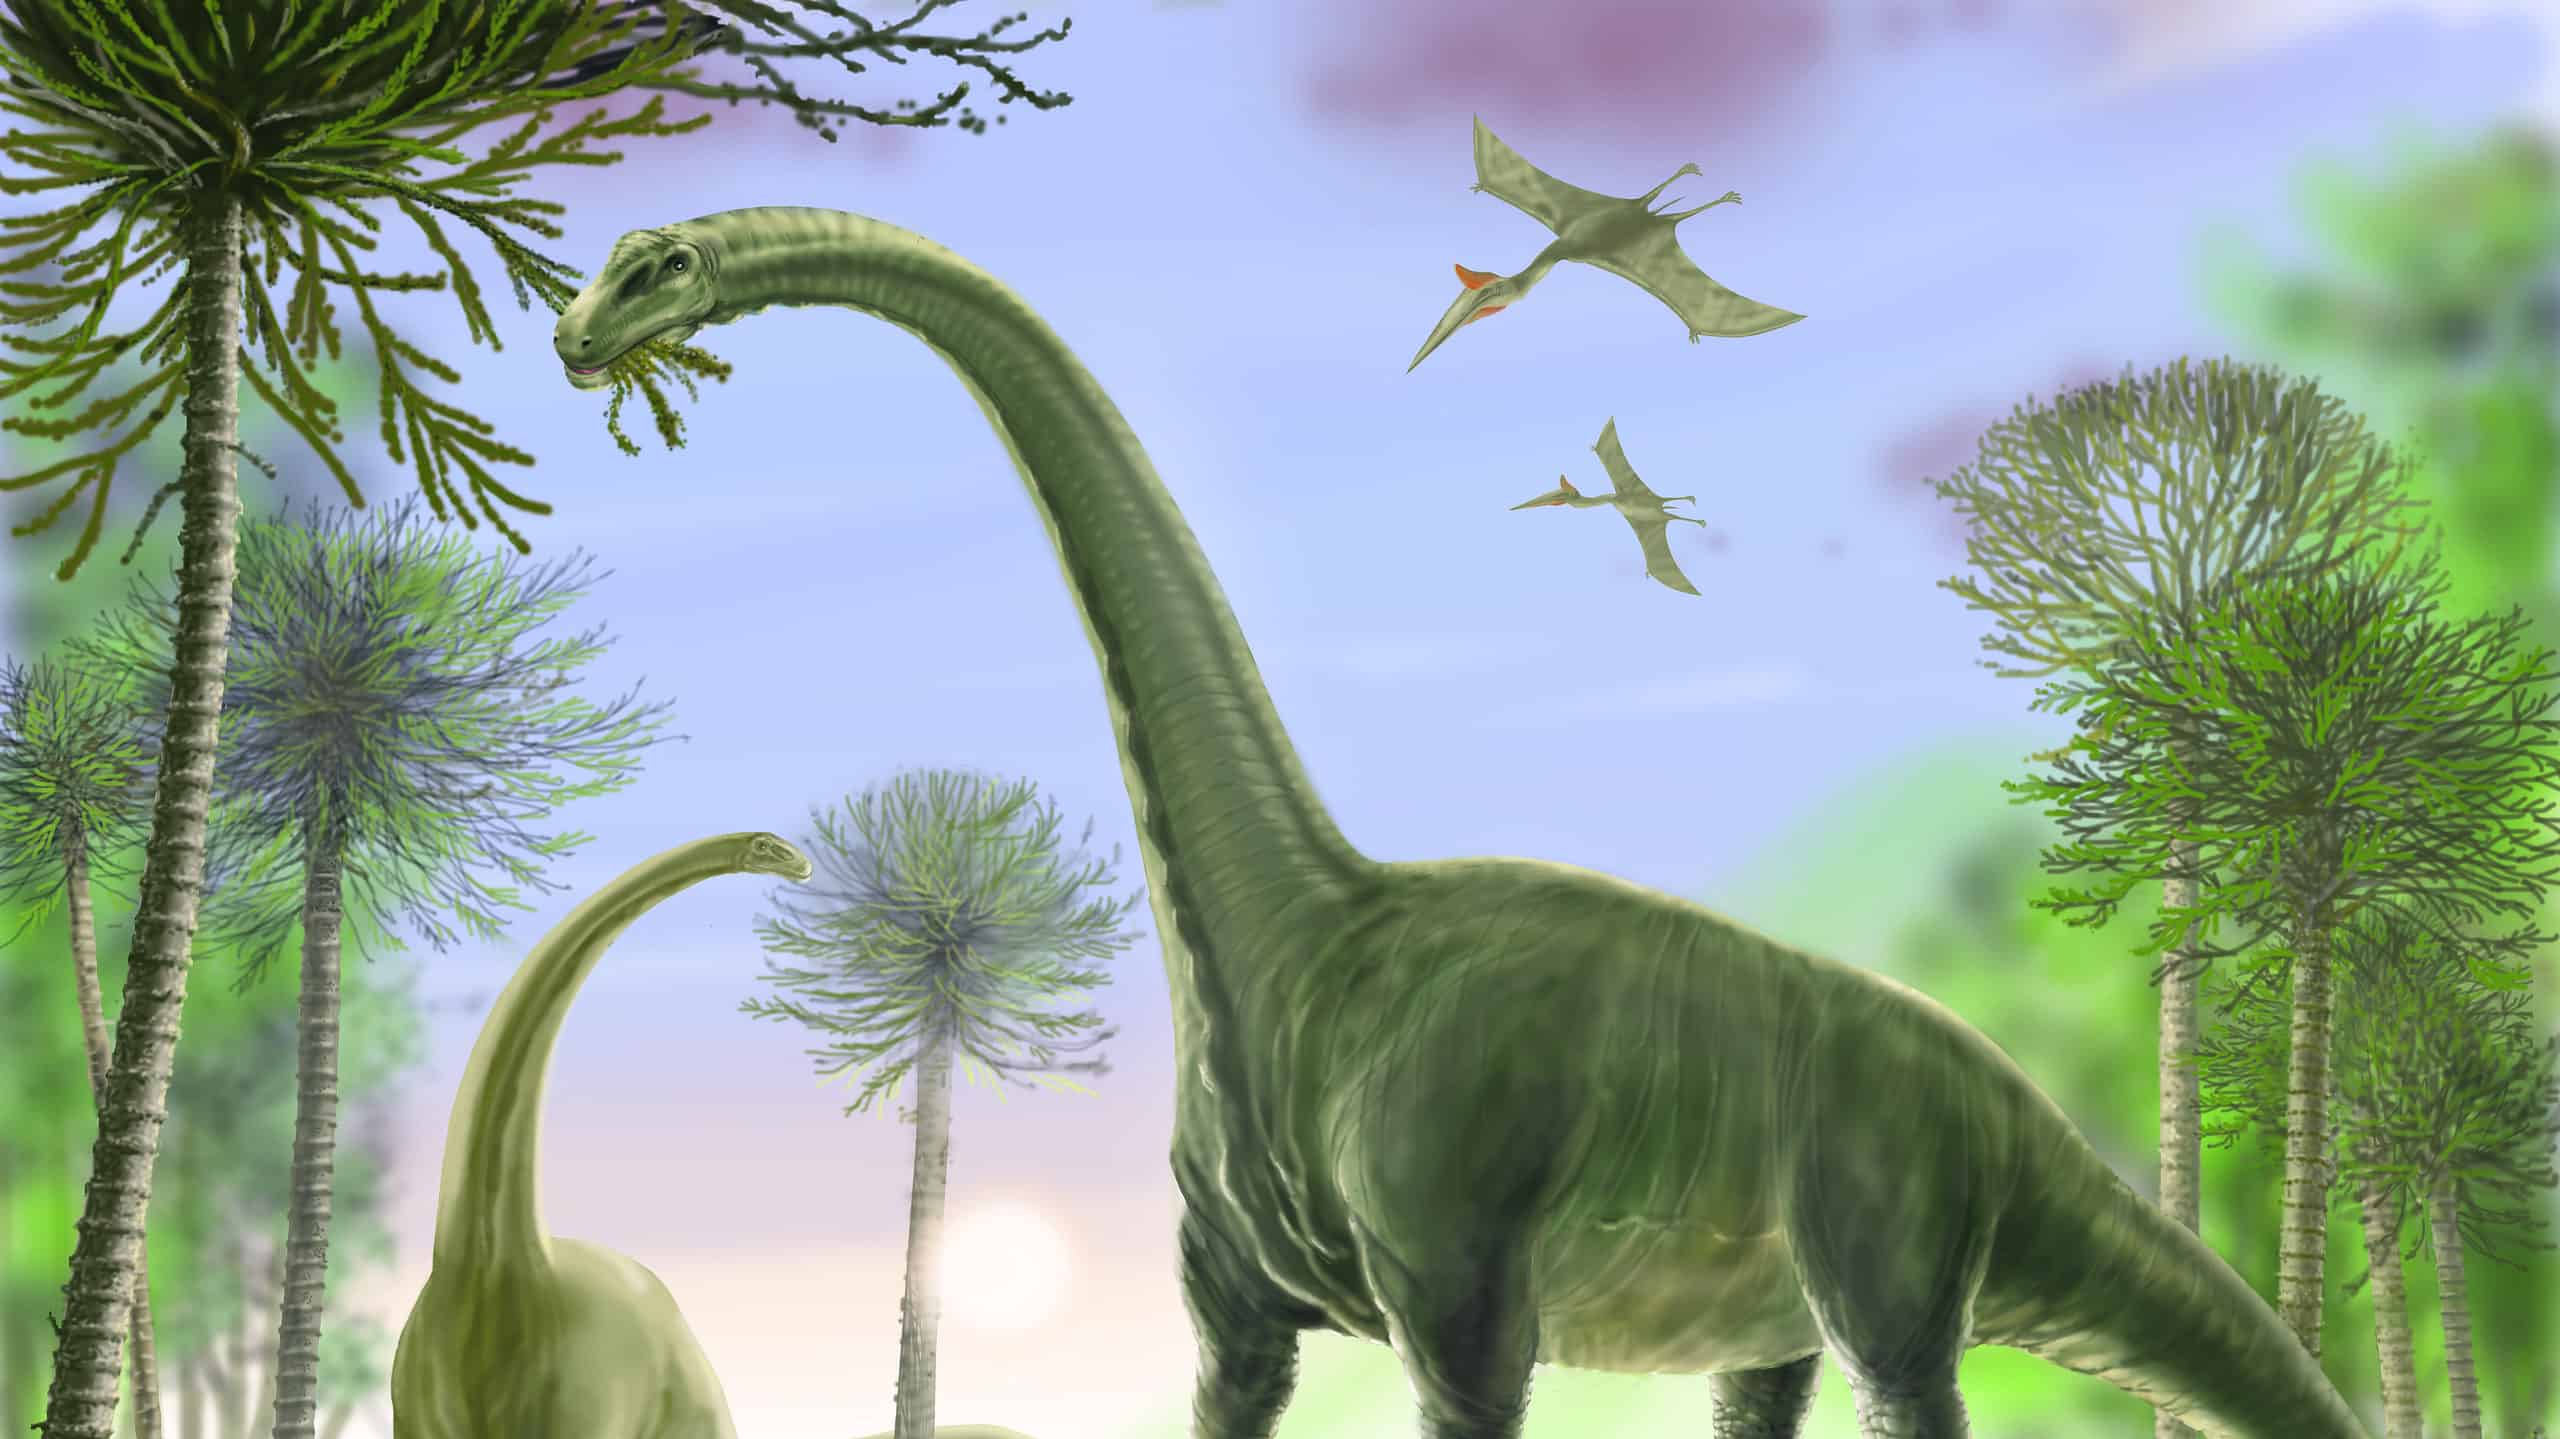 Titanosaurs reached lengths of more than 120 feet long.